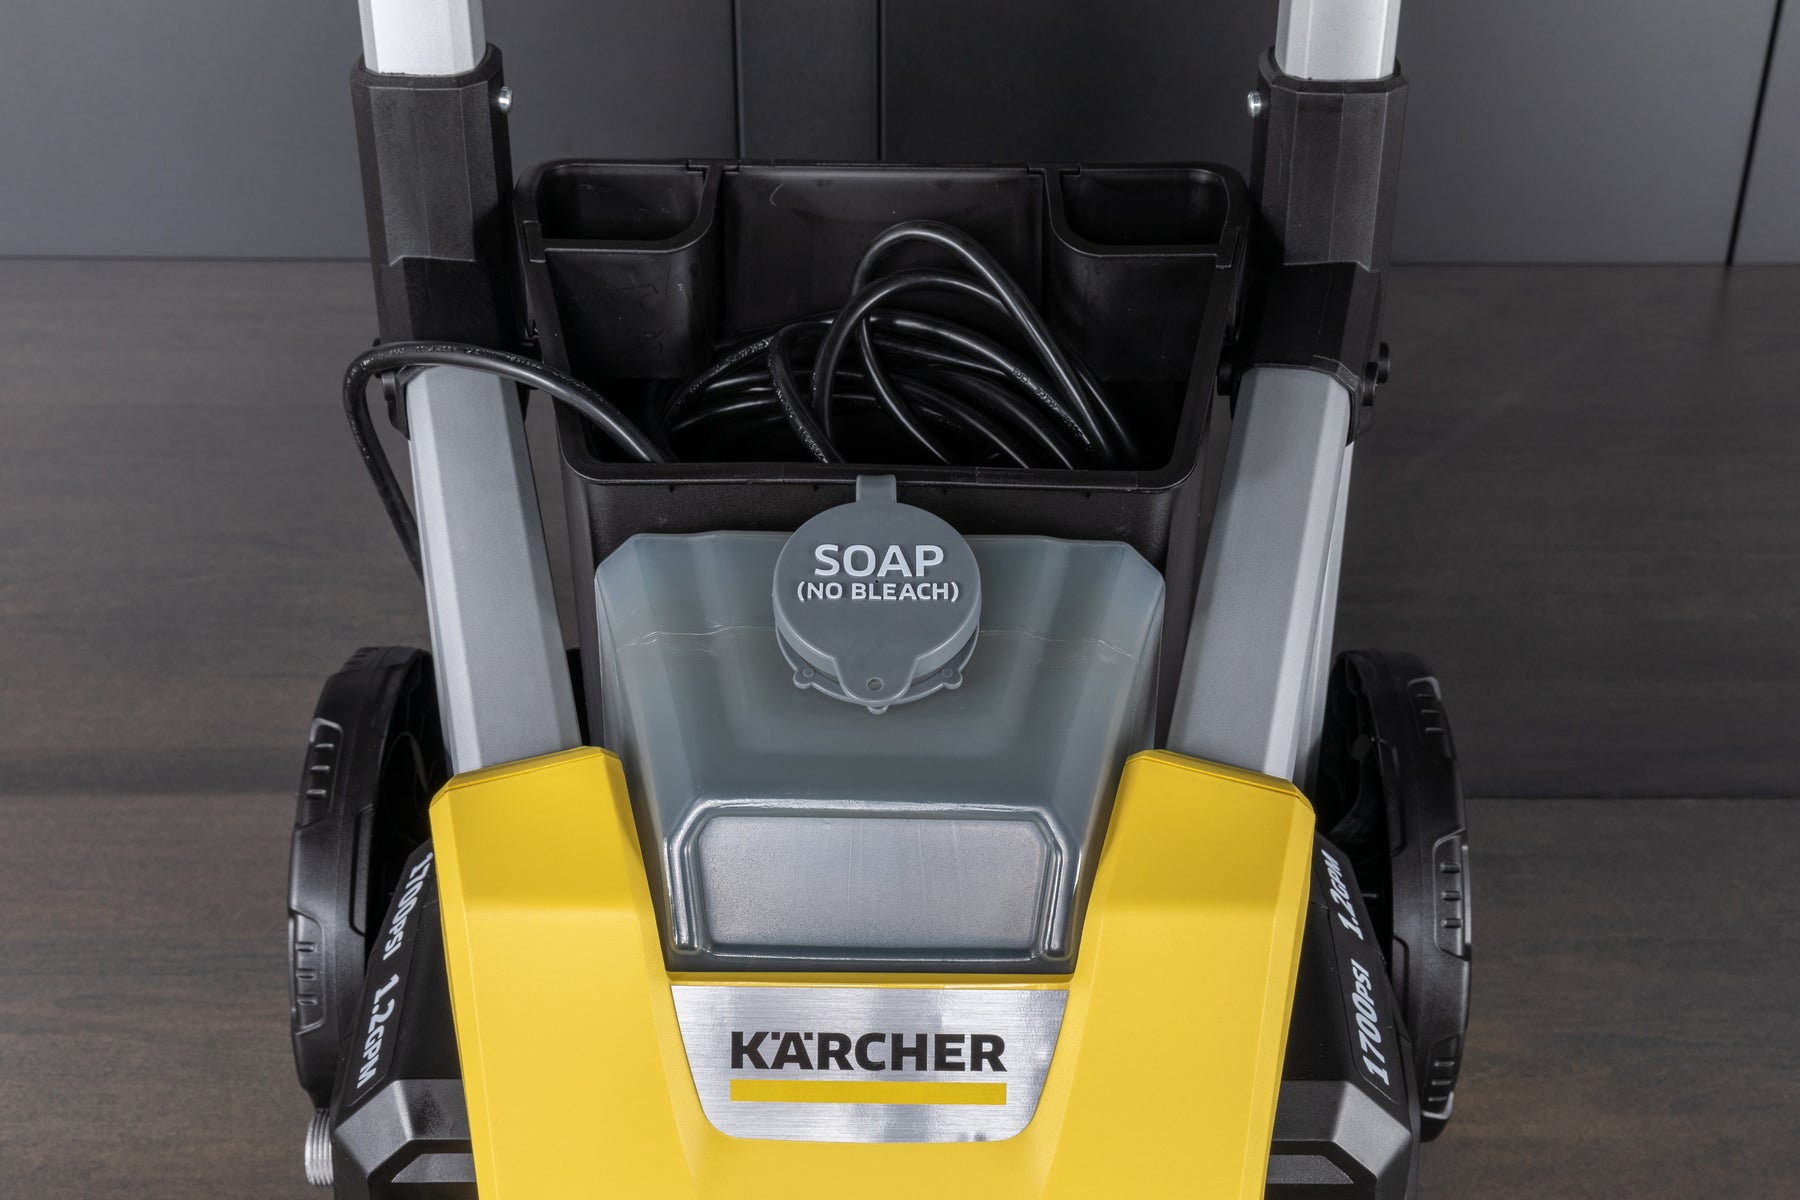 Kärcher - K1700 Cube TruPressure Electric Pressure Washer - 1700 PSI / 2125  Max PSI Power Washer - With 3 Nozzles for Cleaning Cars, Siding